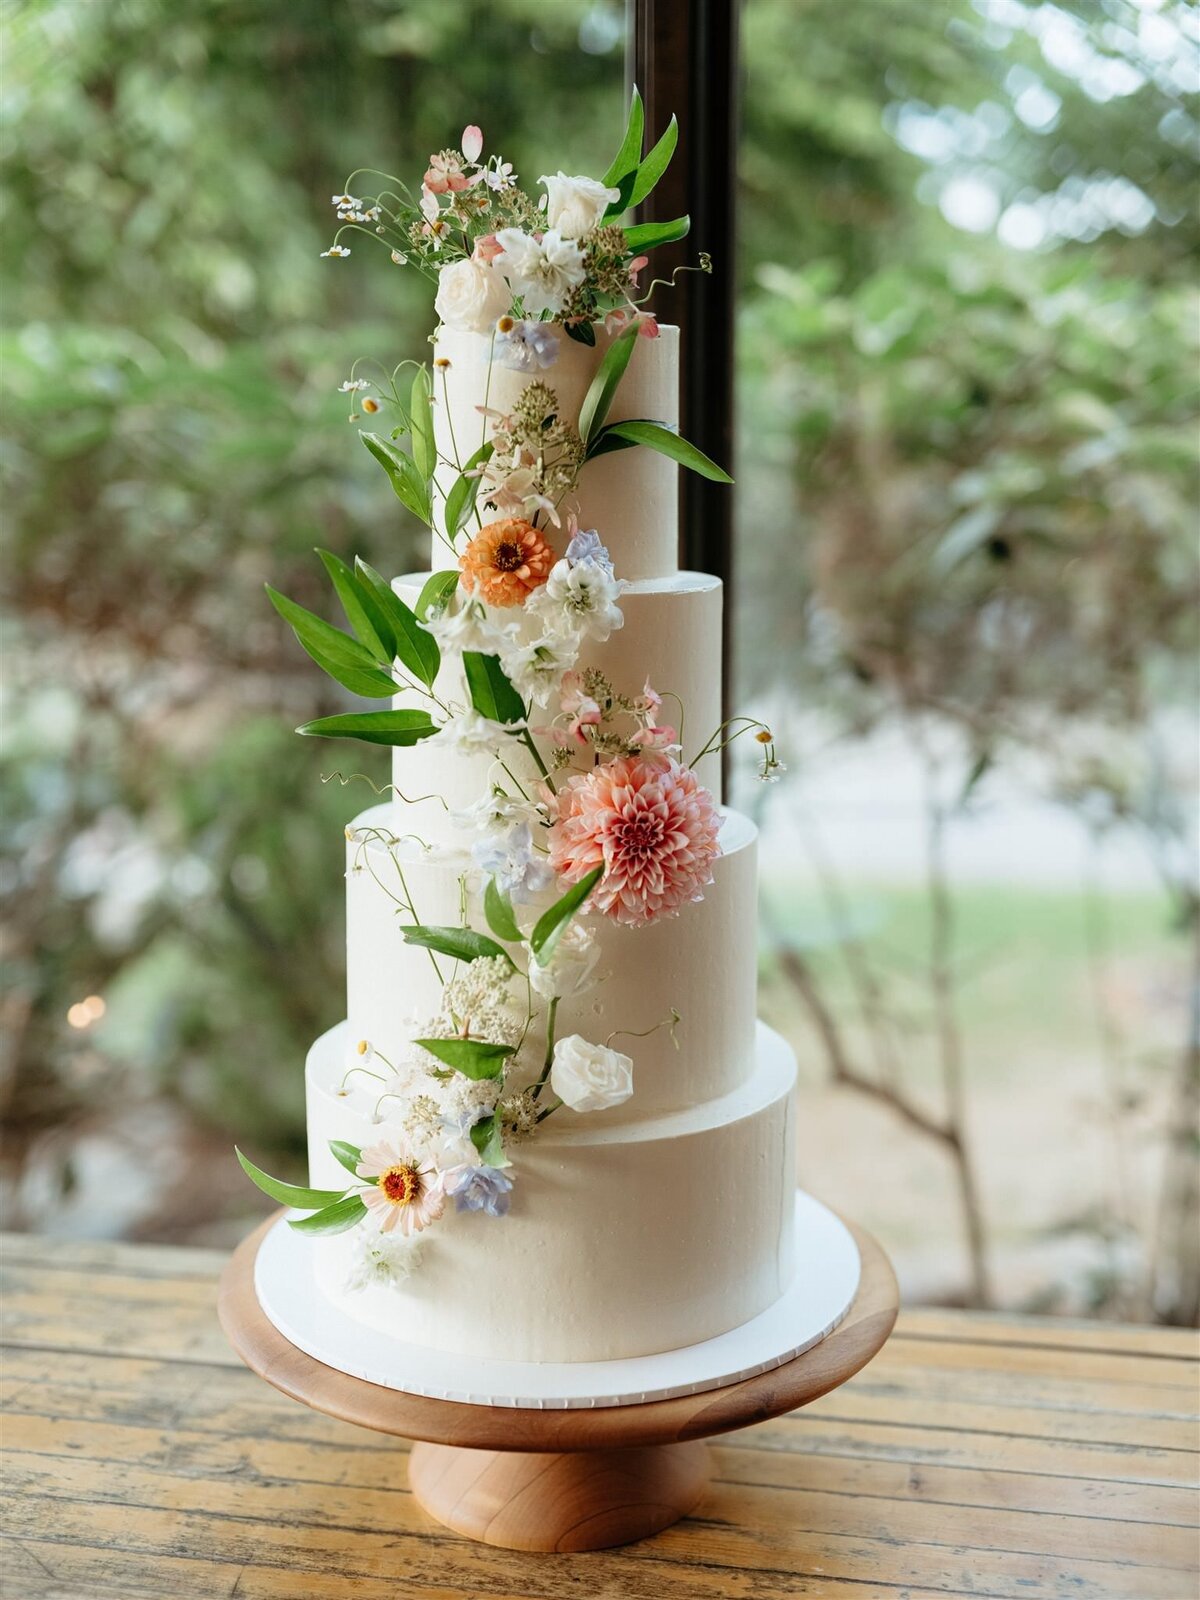 Romantic four-tier white wedding cake with whimsical and colorful floral accent sites on top of a simple natural wood round pedestal cake stand in front of large window overlooking trees and lake.